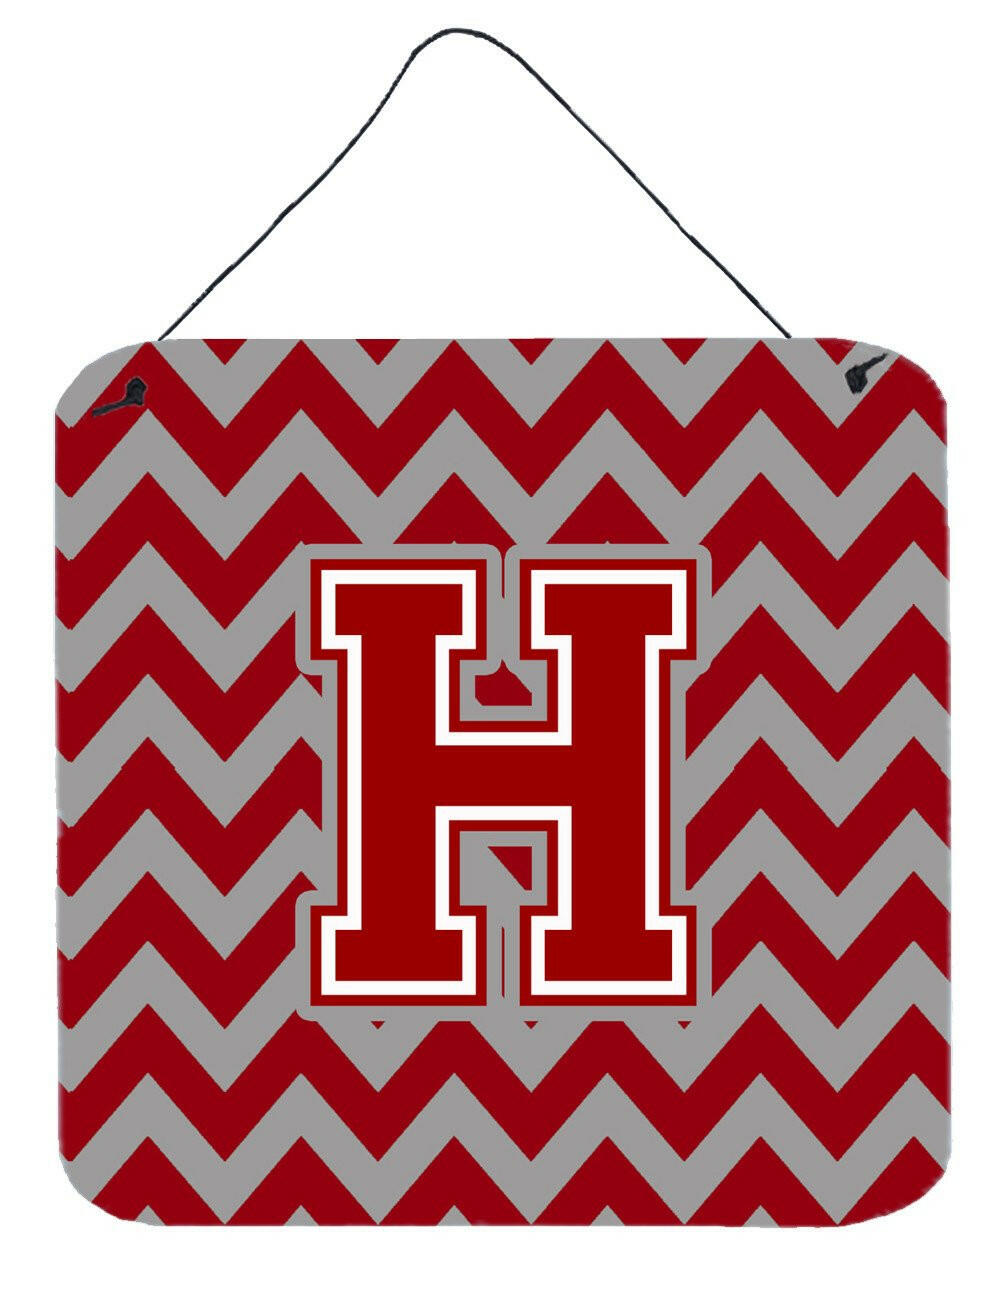 Letter H Chevron Maroon and White Wall or Door Hanging Prints CJ1049-HDS66 by Caroline's Treasures